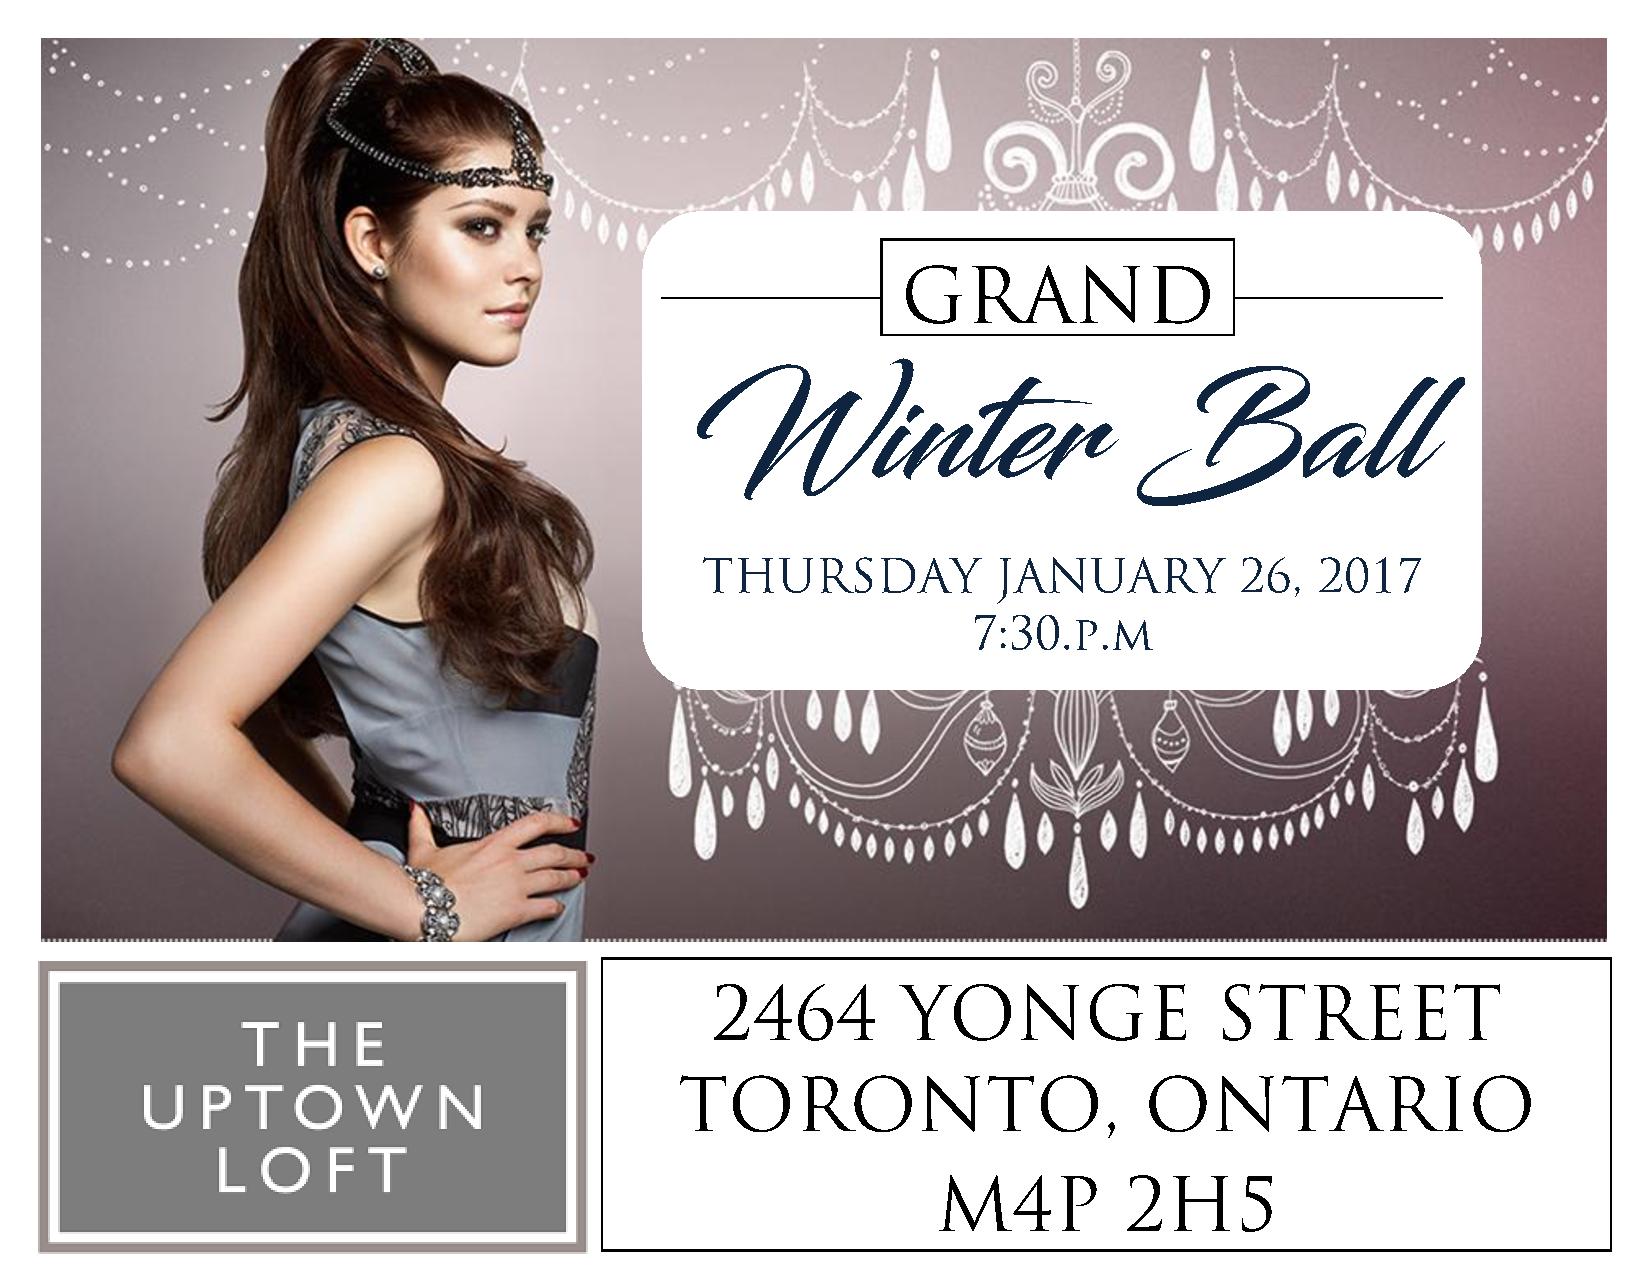 cocktail crawl grand winter ball networking event 2017